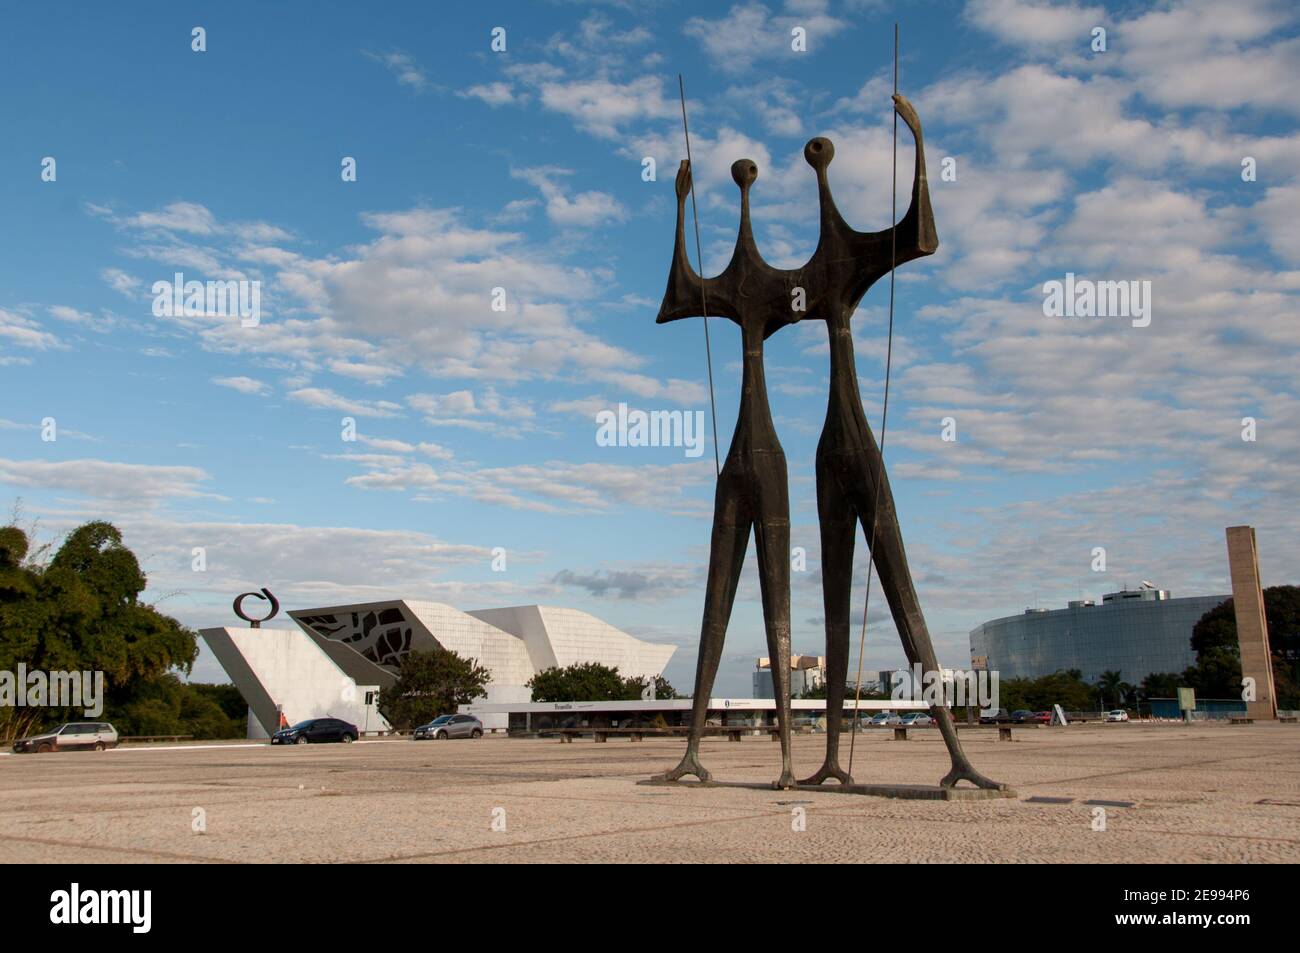 BRASILIA, BRAZIL - JUNE 3, 2015: Sculpture of Two Warriors by artist Bruno Giorgi. The statue is a monument to the workers who built Brasilia. Stock Photo